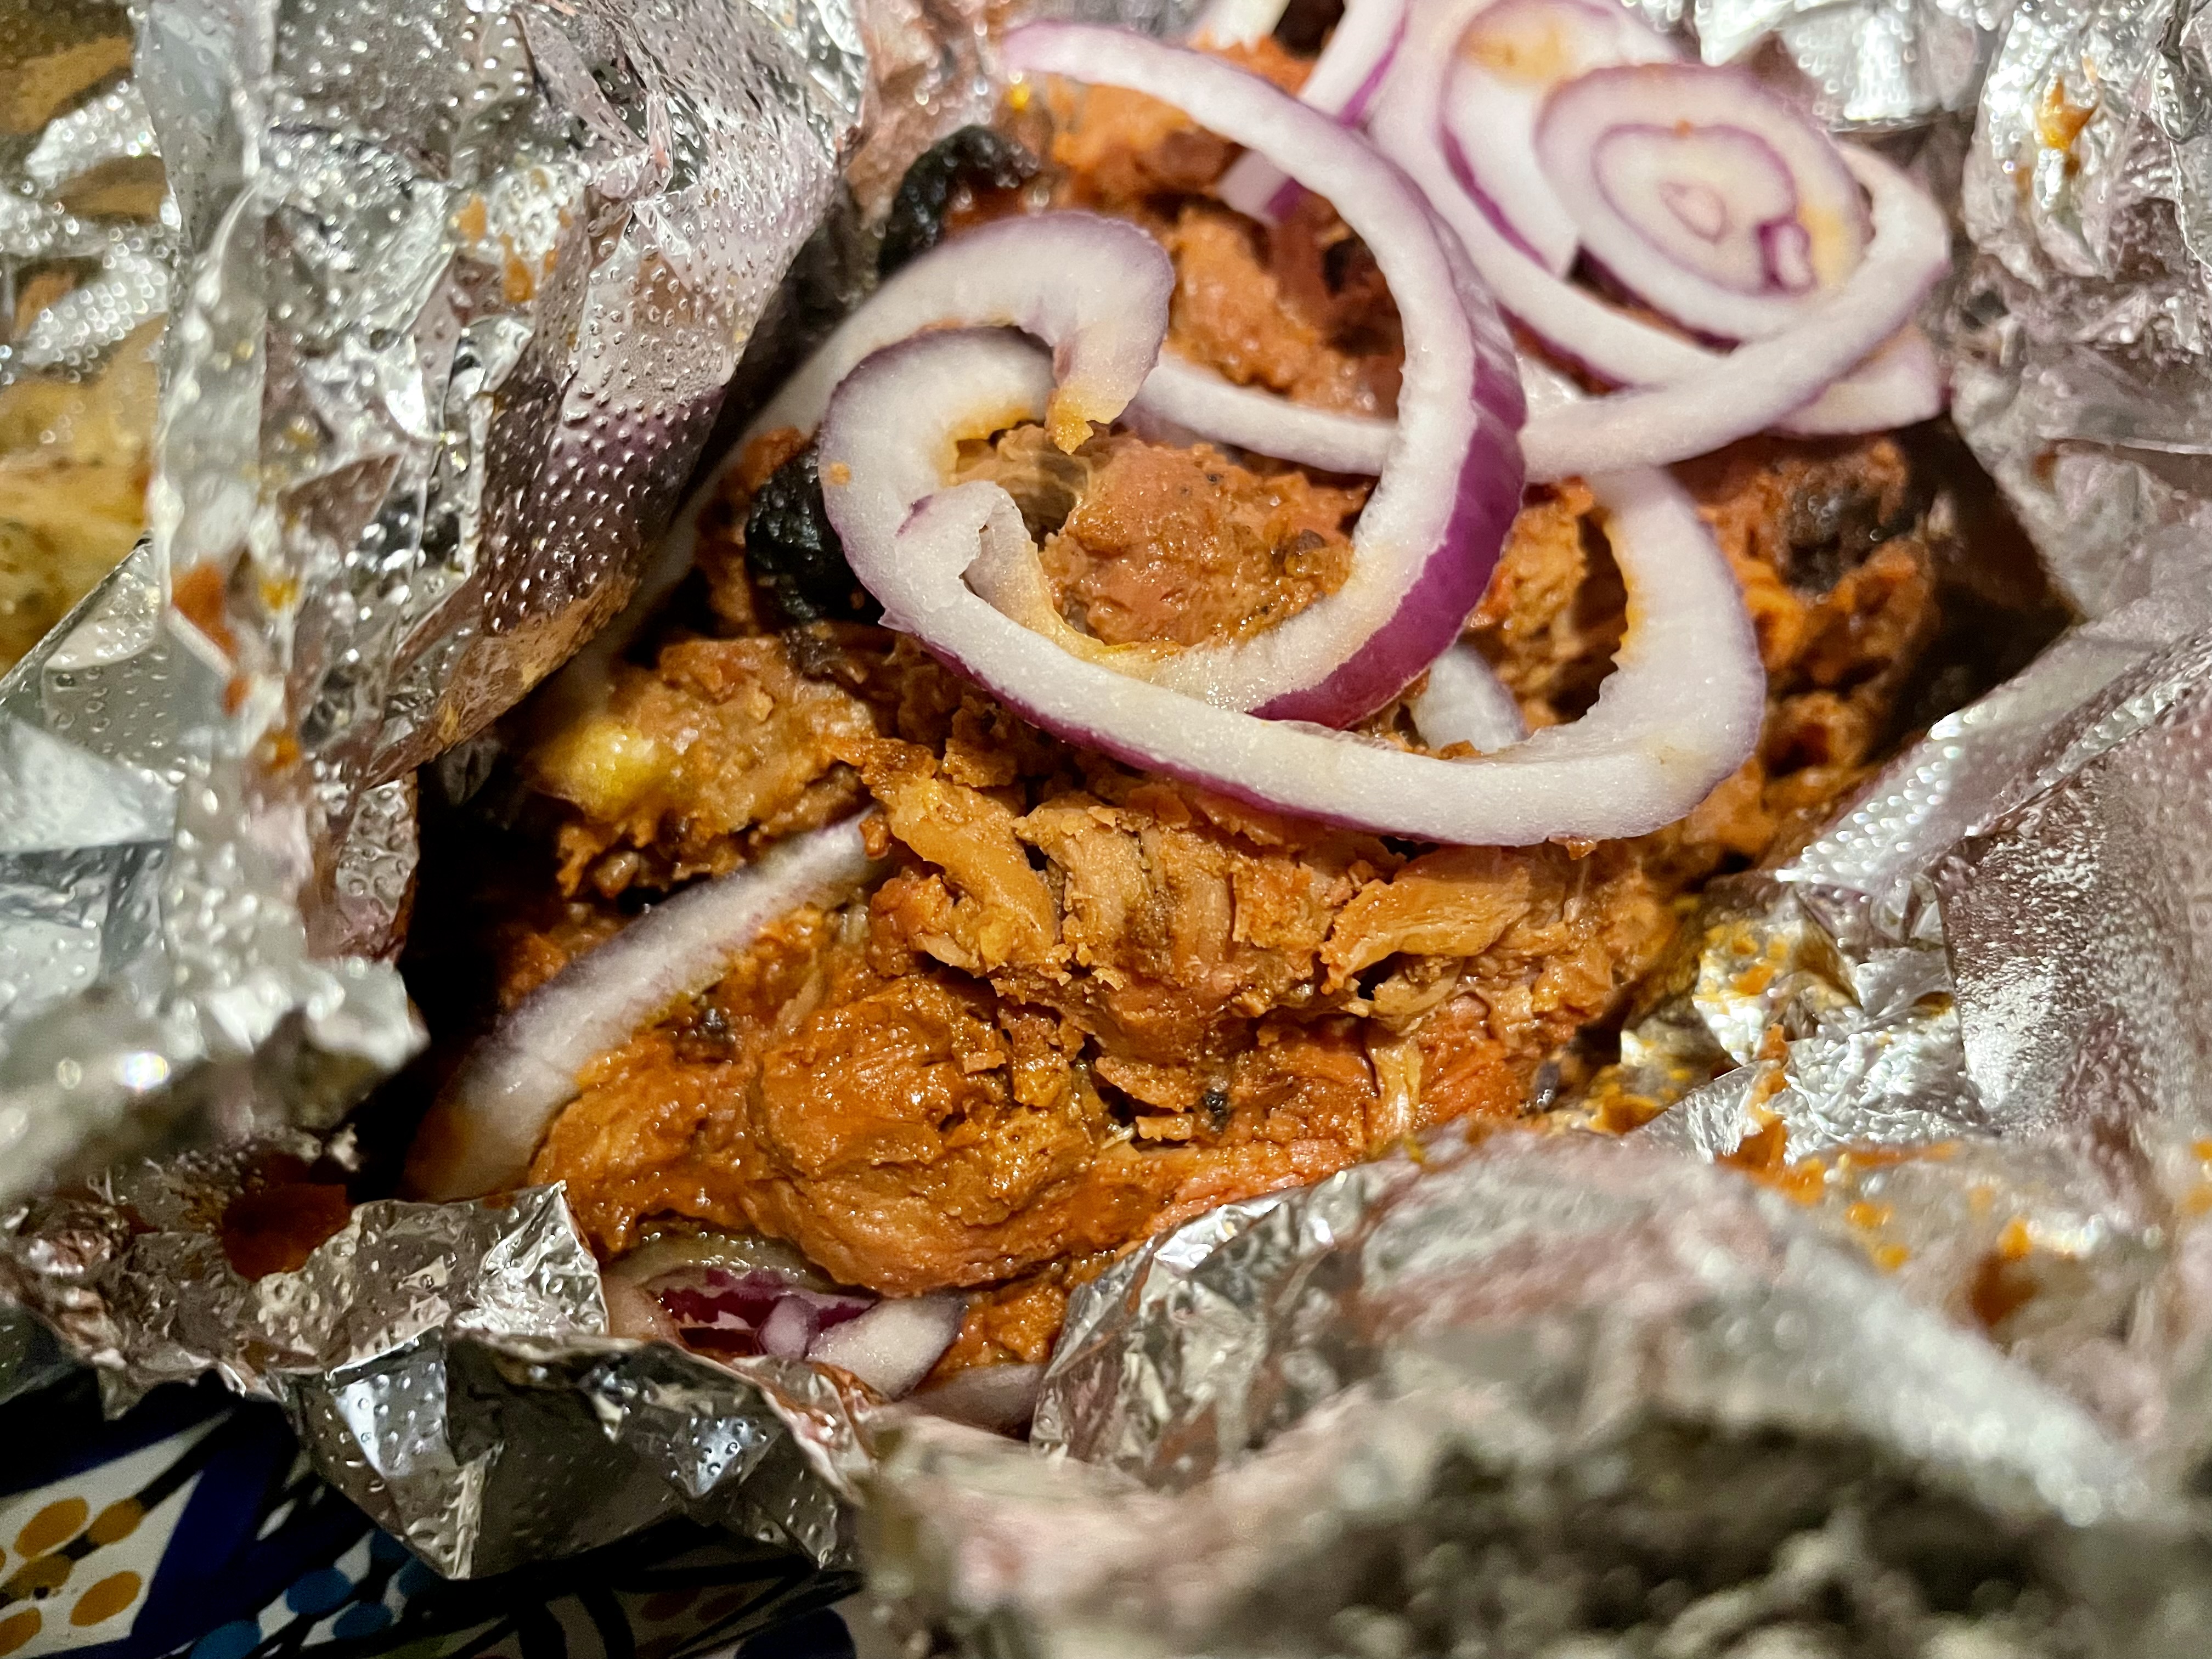 The elusive behari kabab is quite challenging to make and Adnan cookes them perfectly, with the the thin strips of beef marinated with a meat tenderizer, yogurt, fried onions and a spicy seasoning mix that's topped off a drizzle of mustard oil